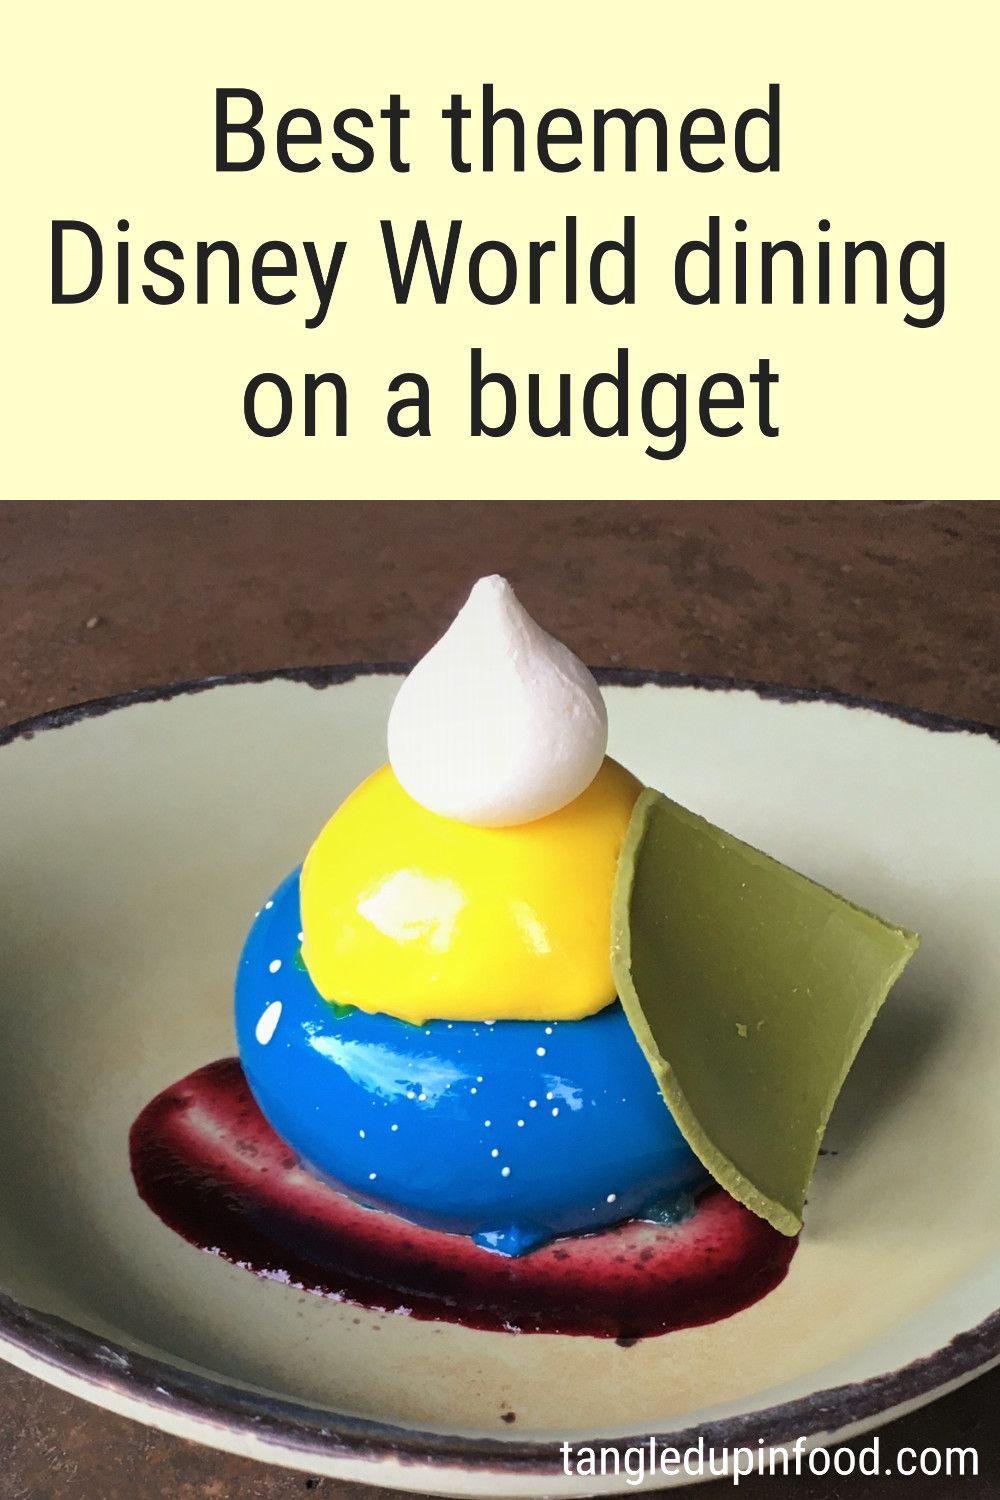 Bright blue mousse cake garnished with a bright yellow topping and meringue dollop and text reading "Best themed Disney World dining on a budget"